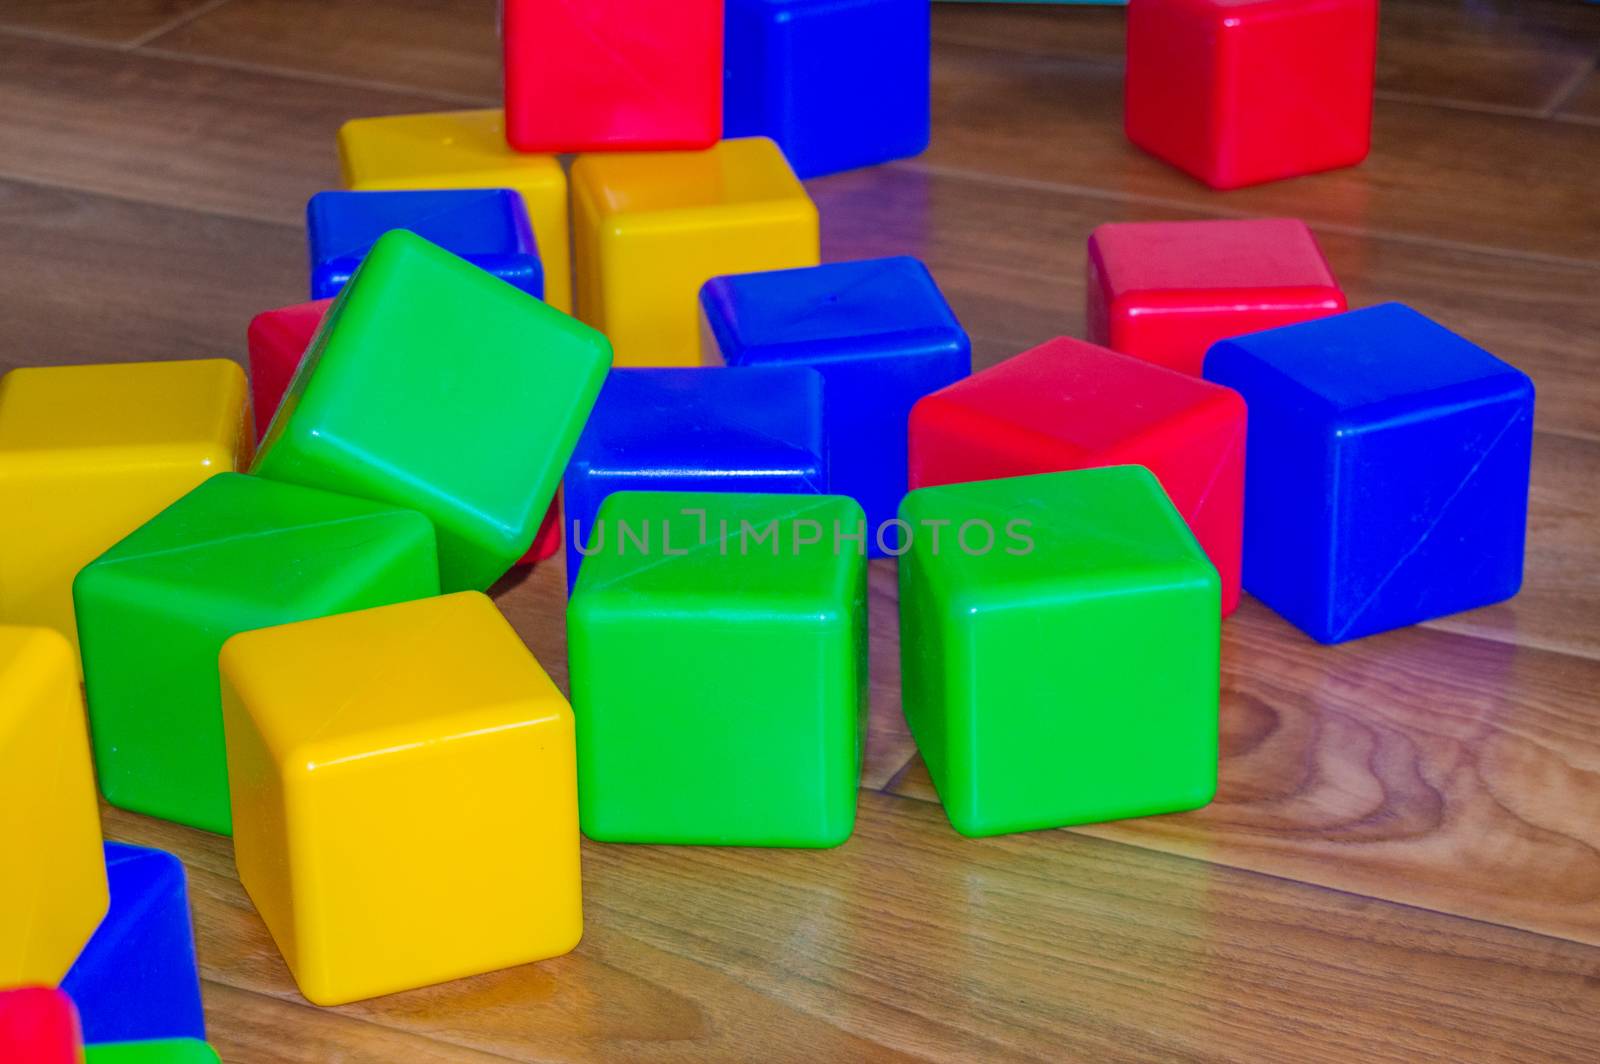 Colorful plastic cubes for children's games are scattered on the wooden floor by claire_lucia